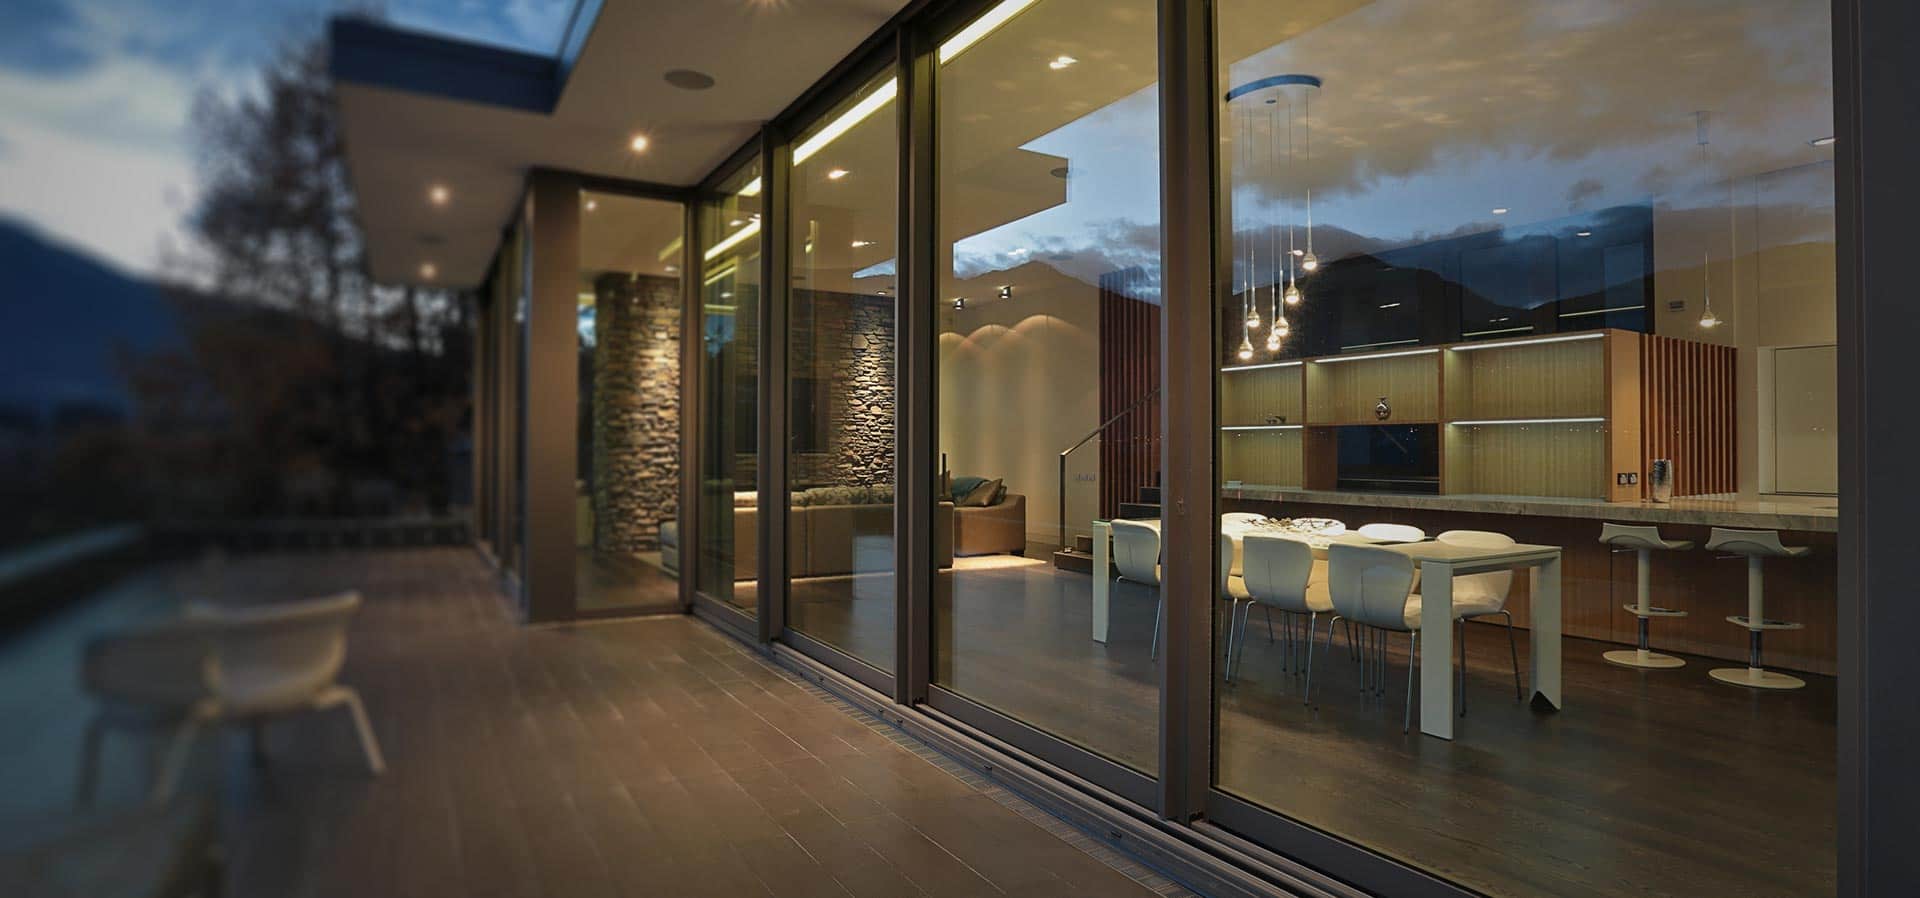 Large span of sliding aluminium patio doors with large glass area which provide a modern contemporary view